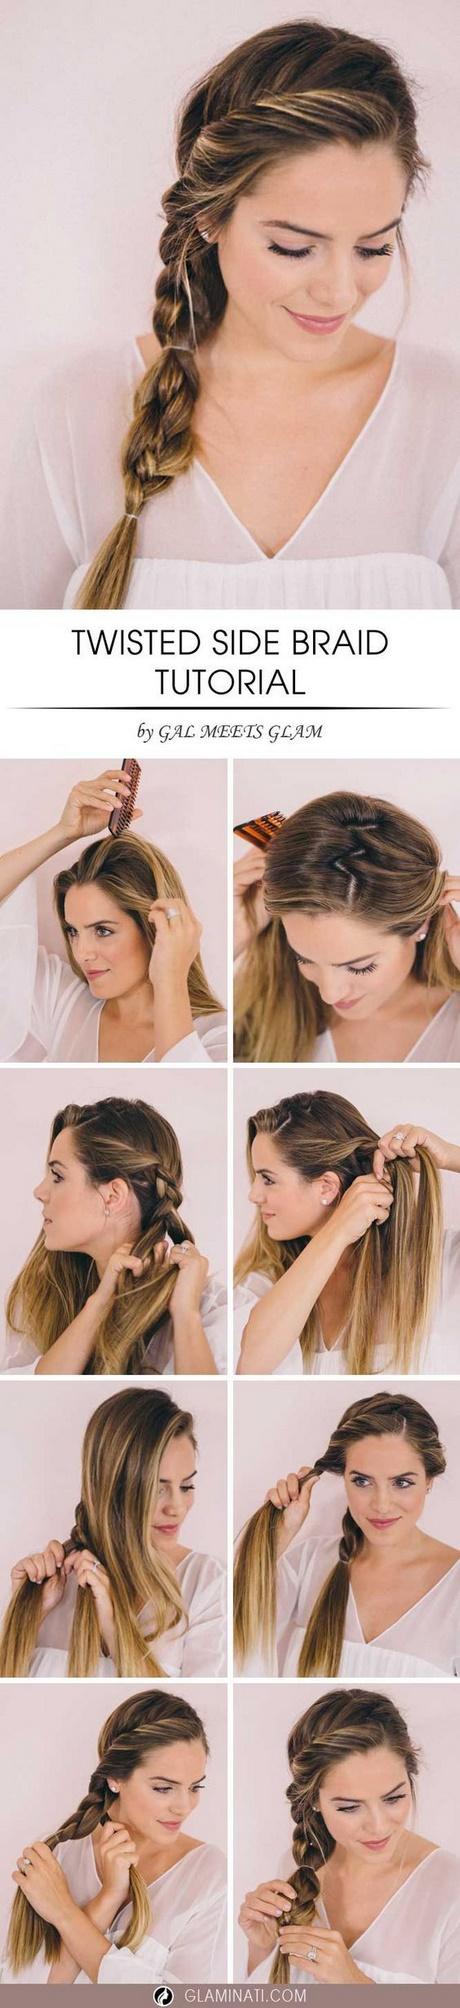 Normal everyday hairstyles normal-everyday-hairstyles-26